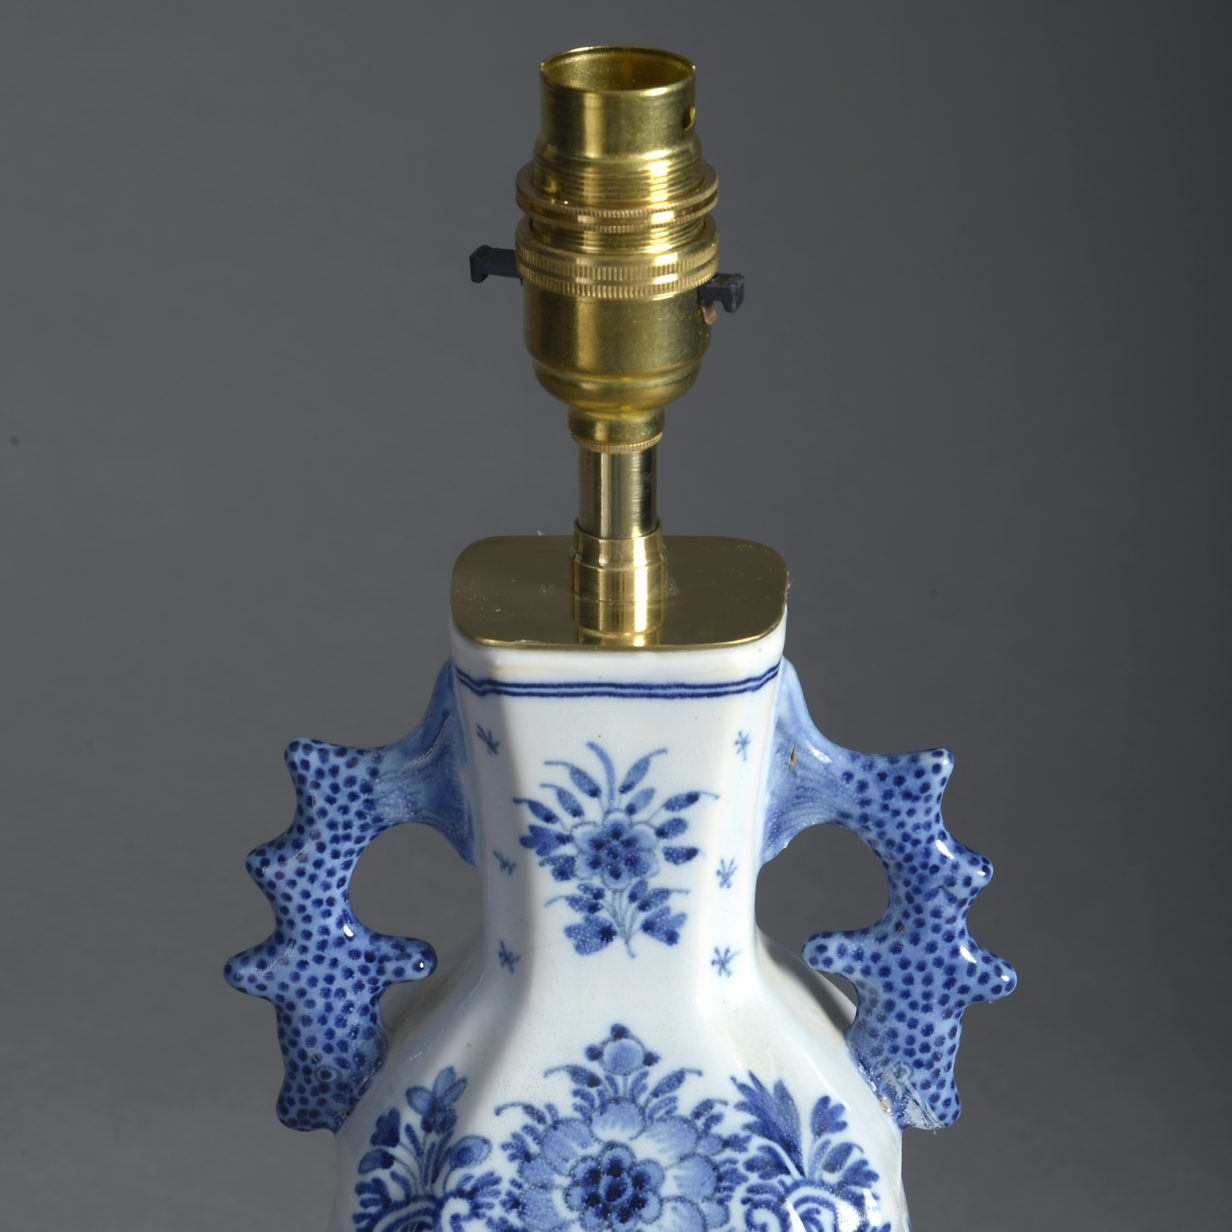 An early 20th century blue and white delft vase lamp